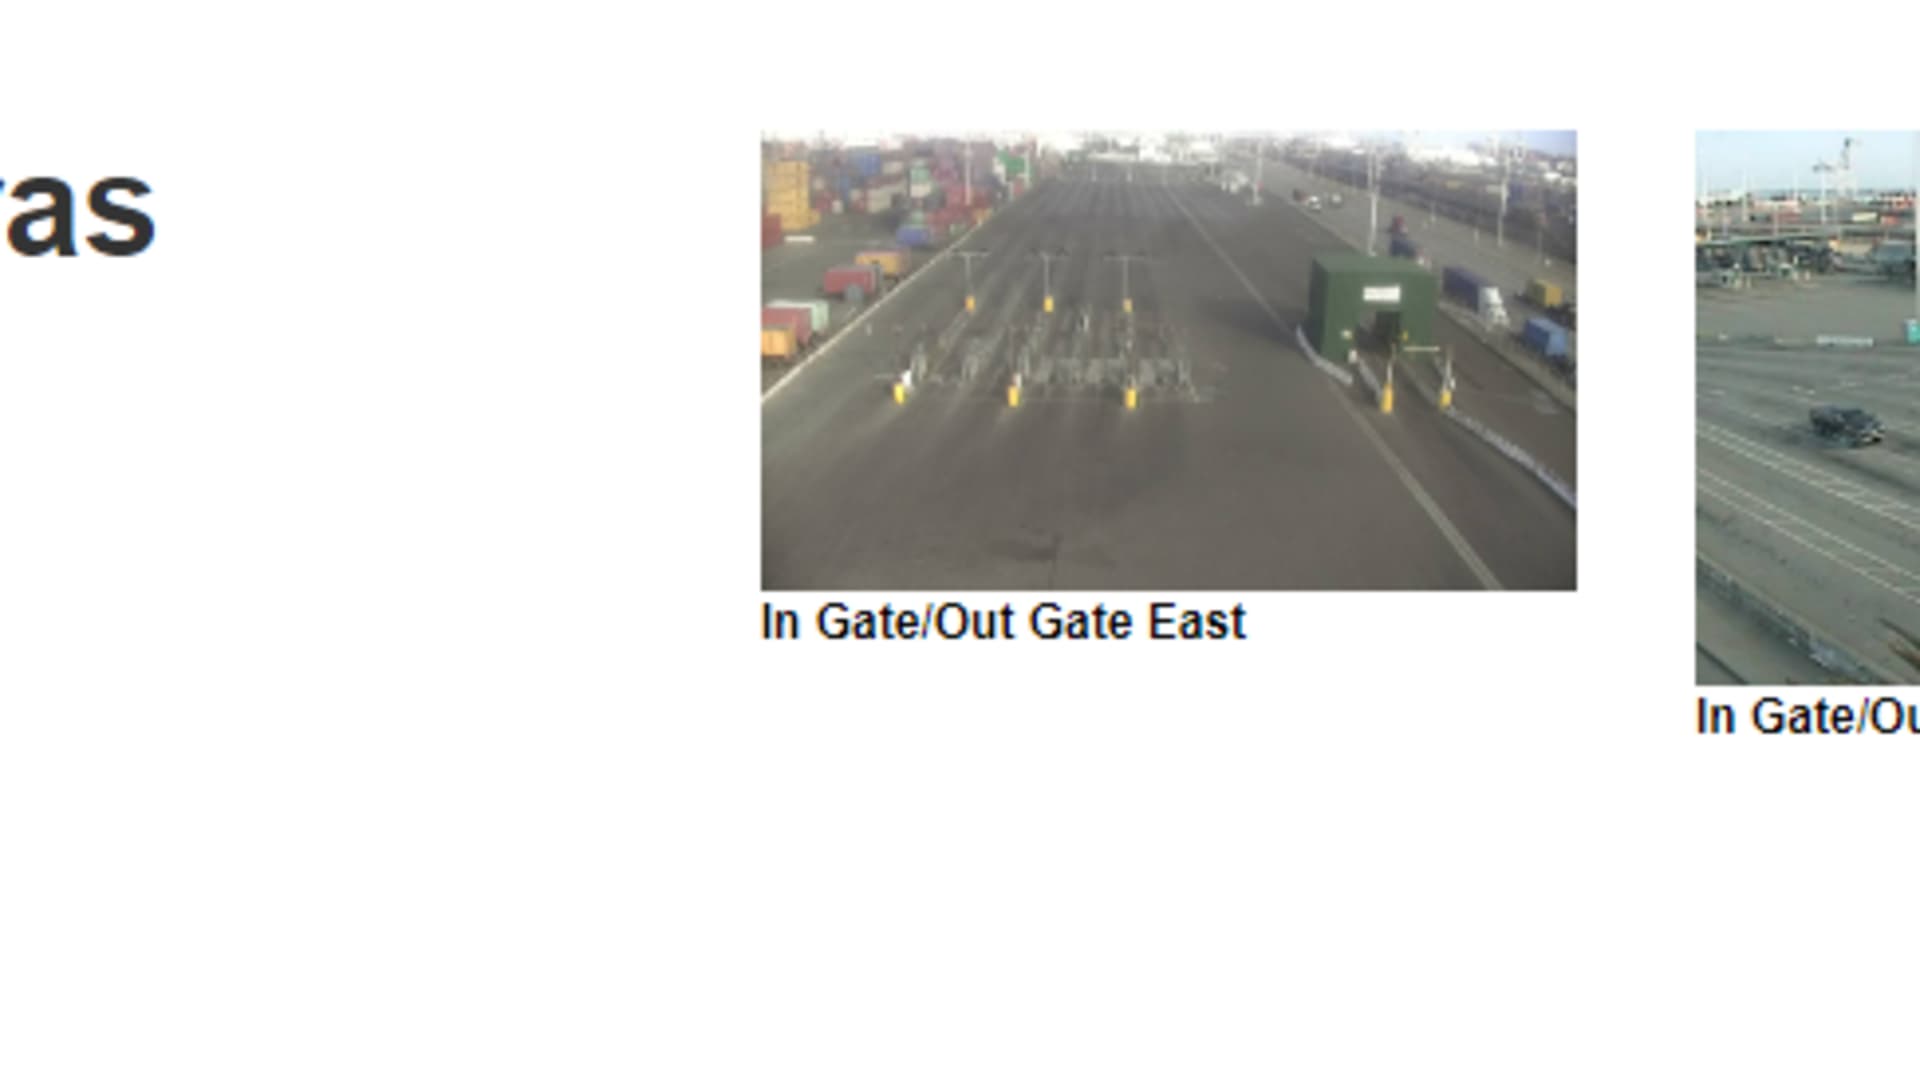 Webcams showing no truck activity at Port of Oakland where lack of workers closed terminal operations